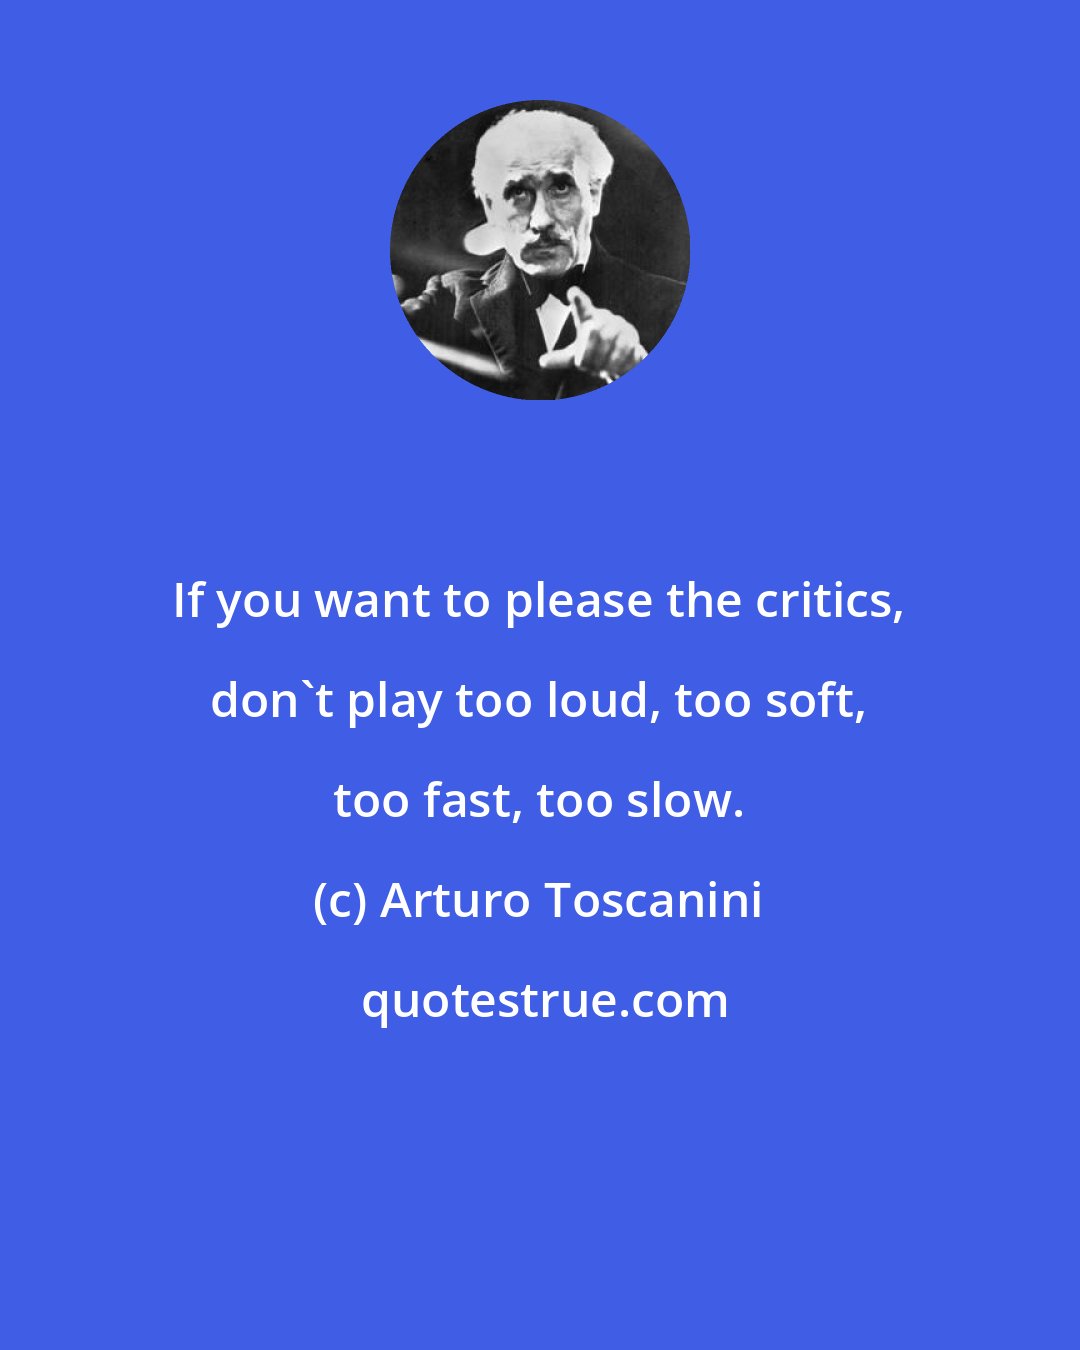 Arturo Toscanini: If you want to please the critics, don't play too loud, too soft, too fast, too slow.